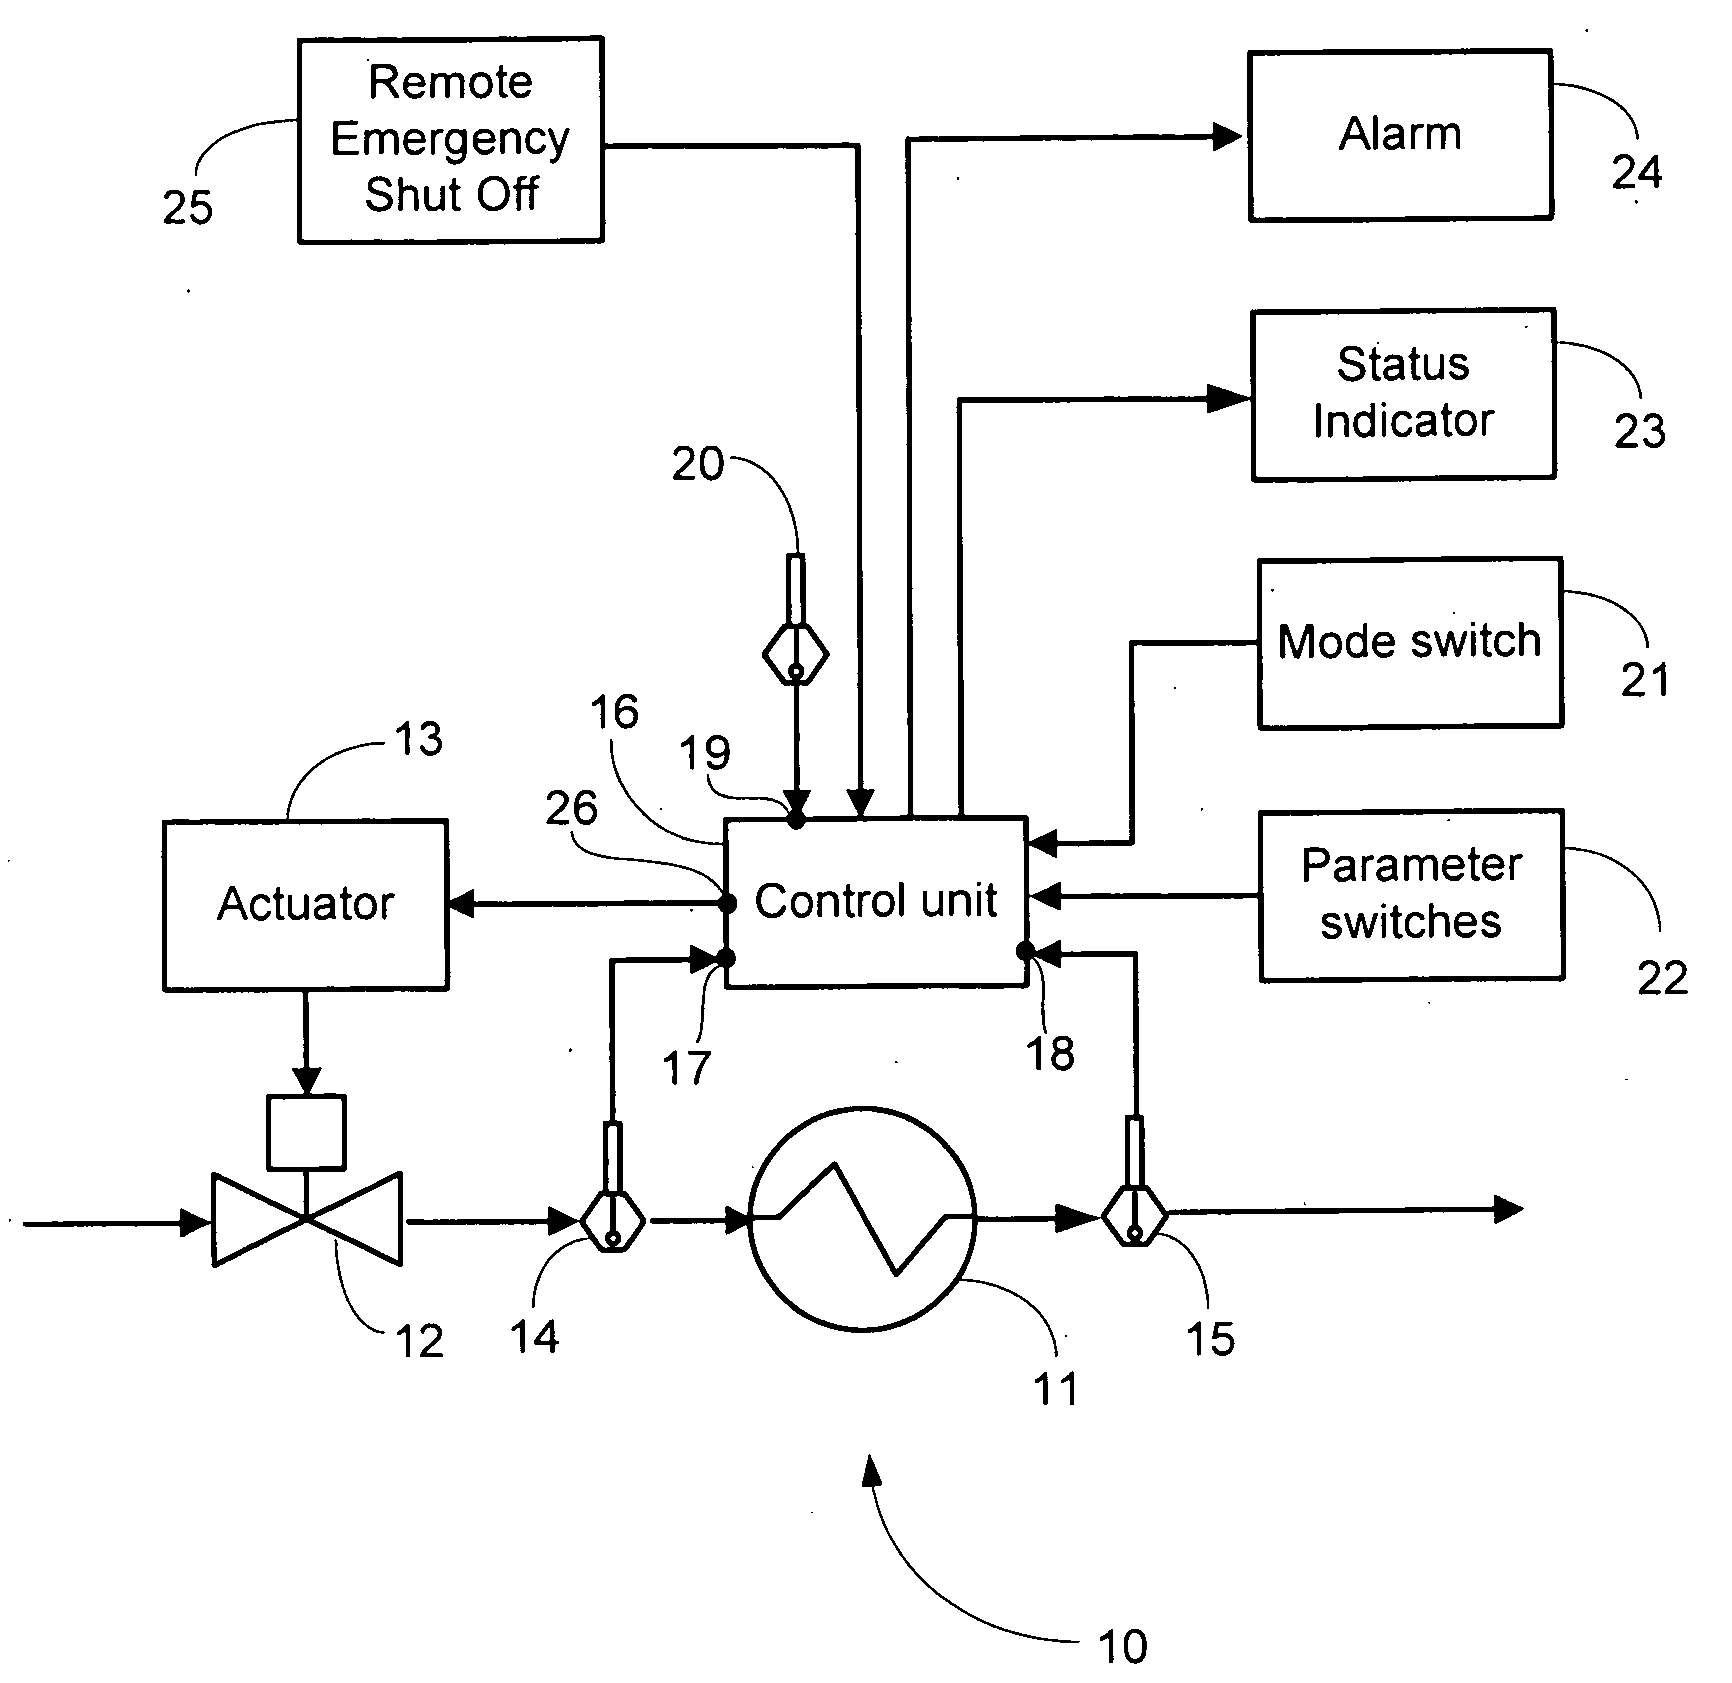 Standalone flow rate controller for controlling flow rate of cooling or heating fluid through a heat exchanger